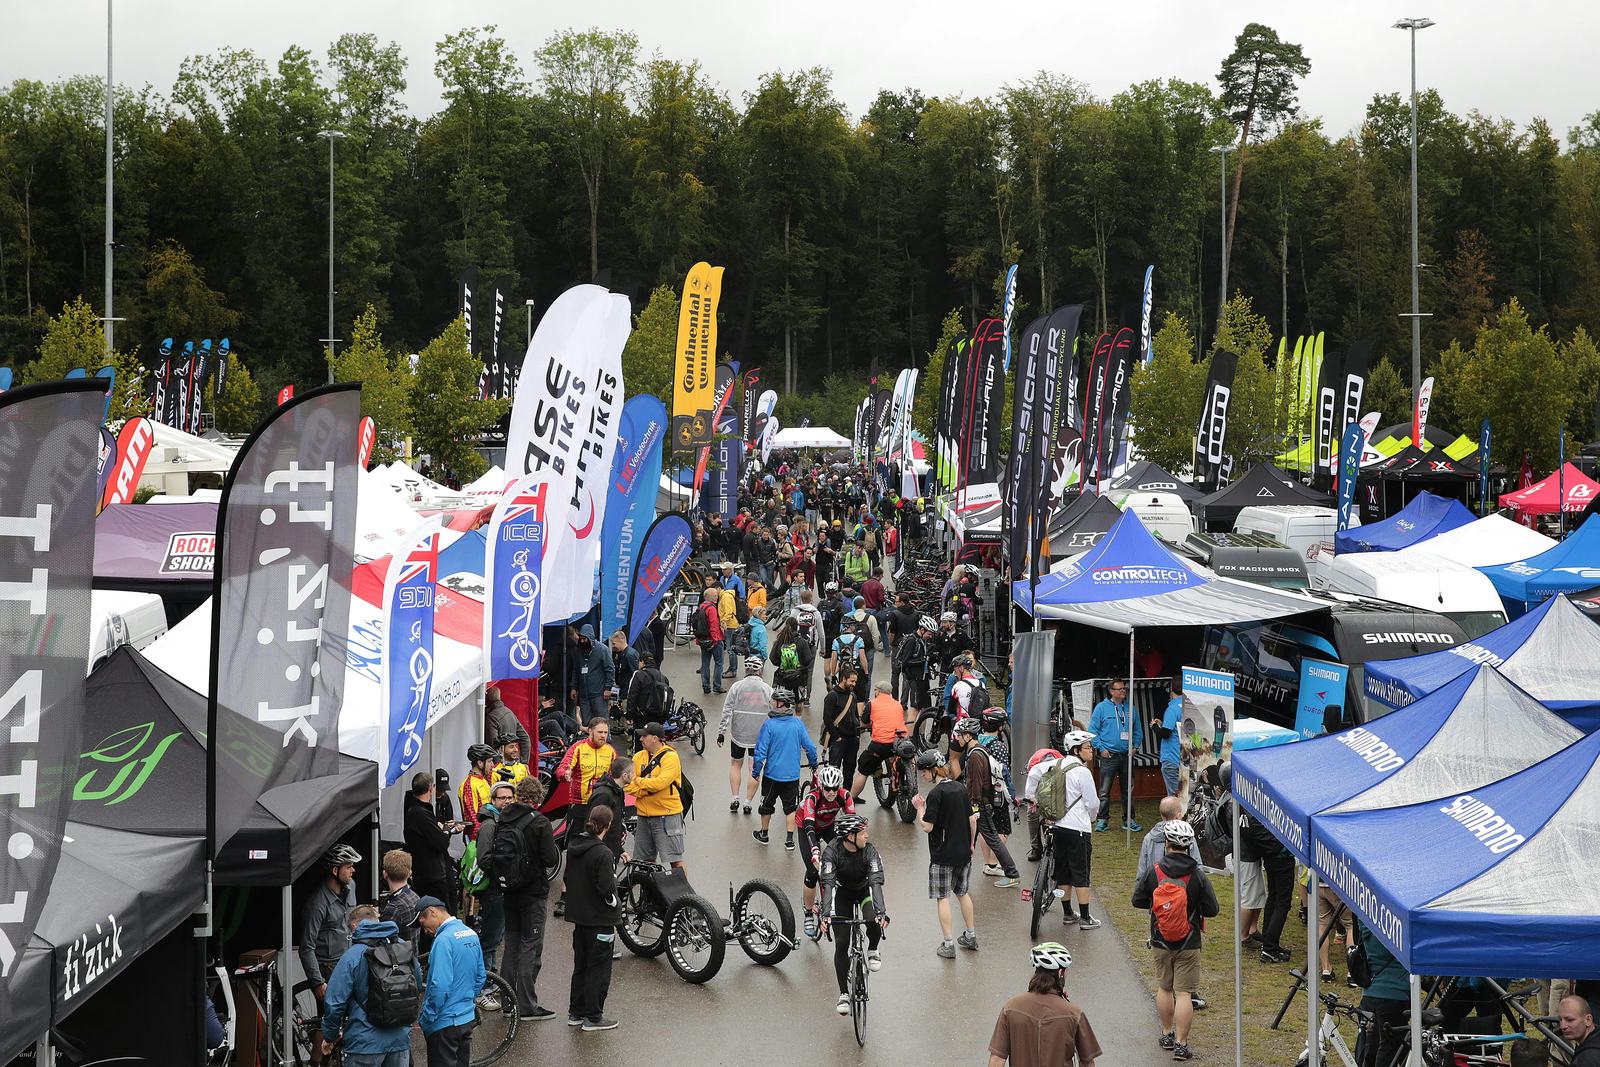 The 2015 edition of Eurobike is scheduled from August 26 to 29. – Photo Eurobike